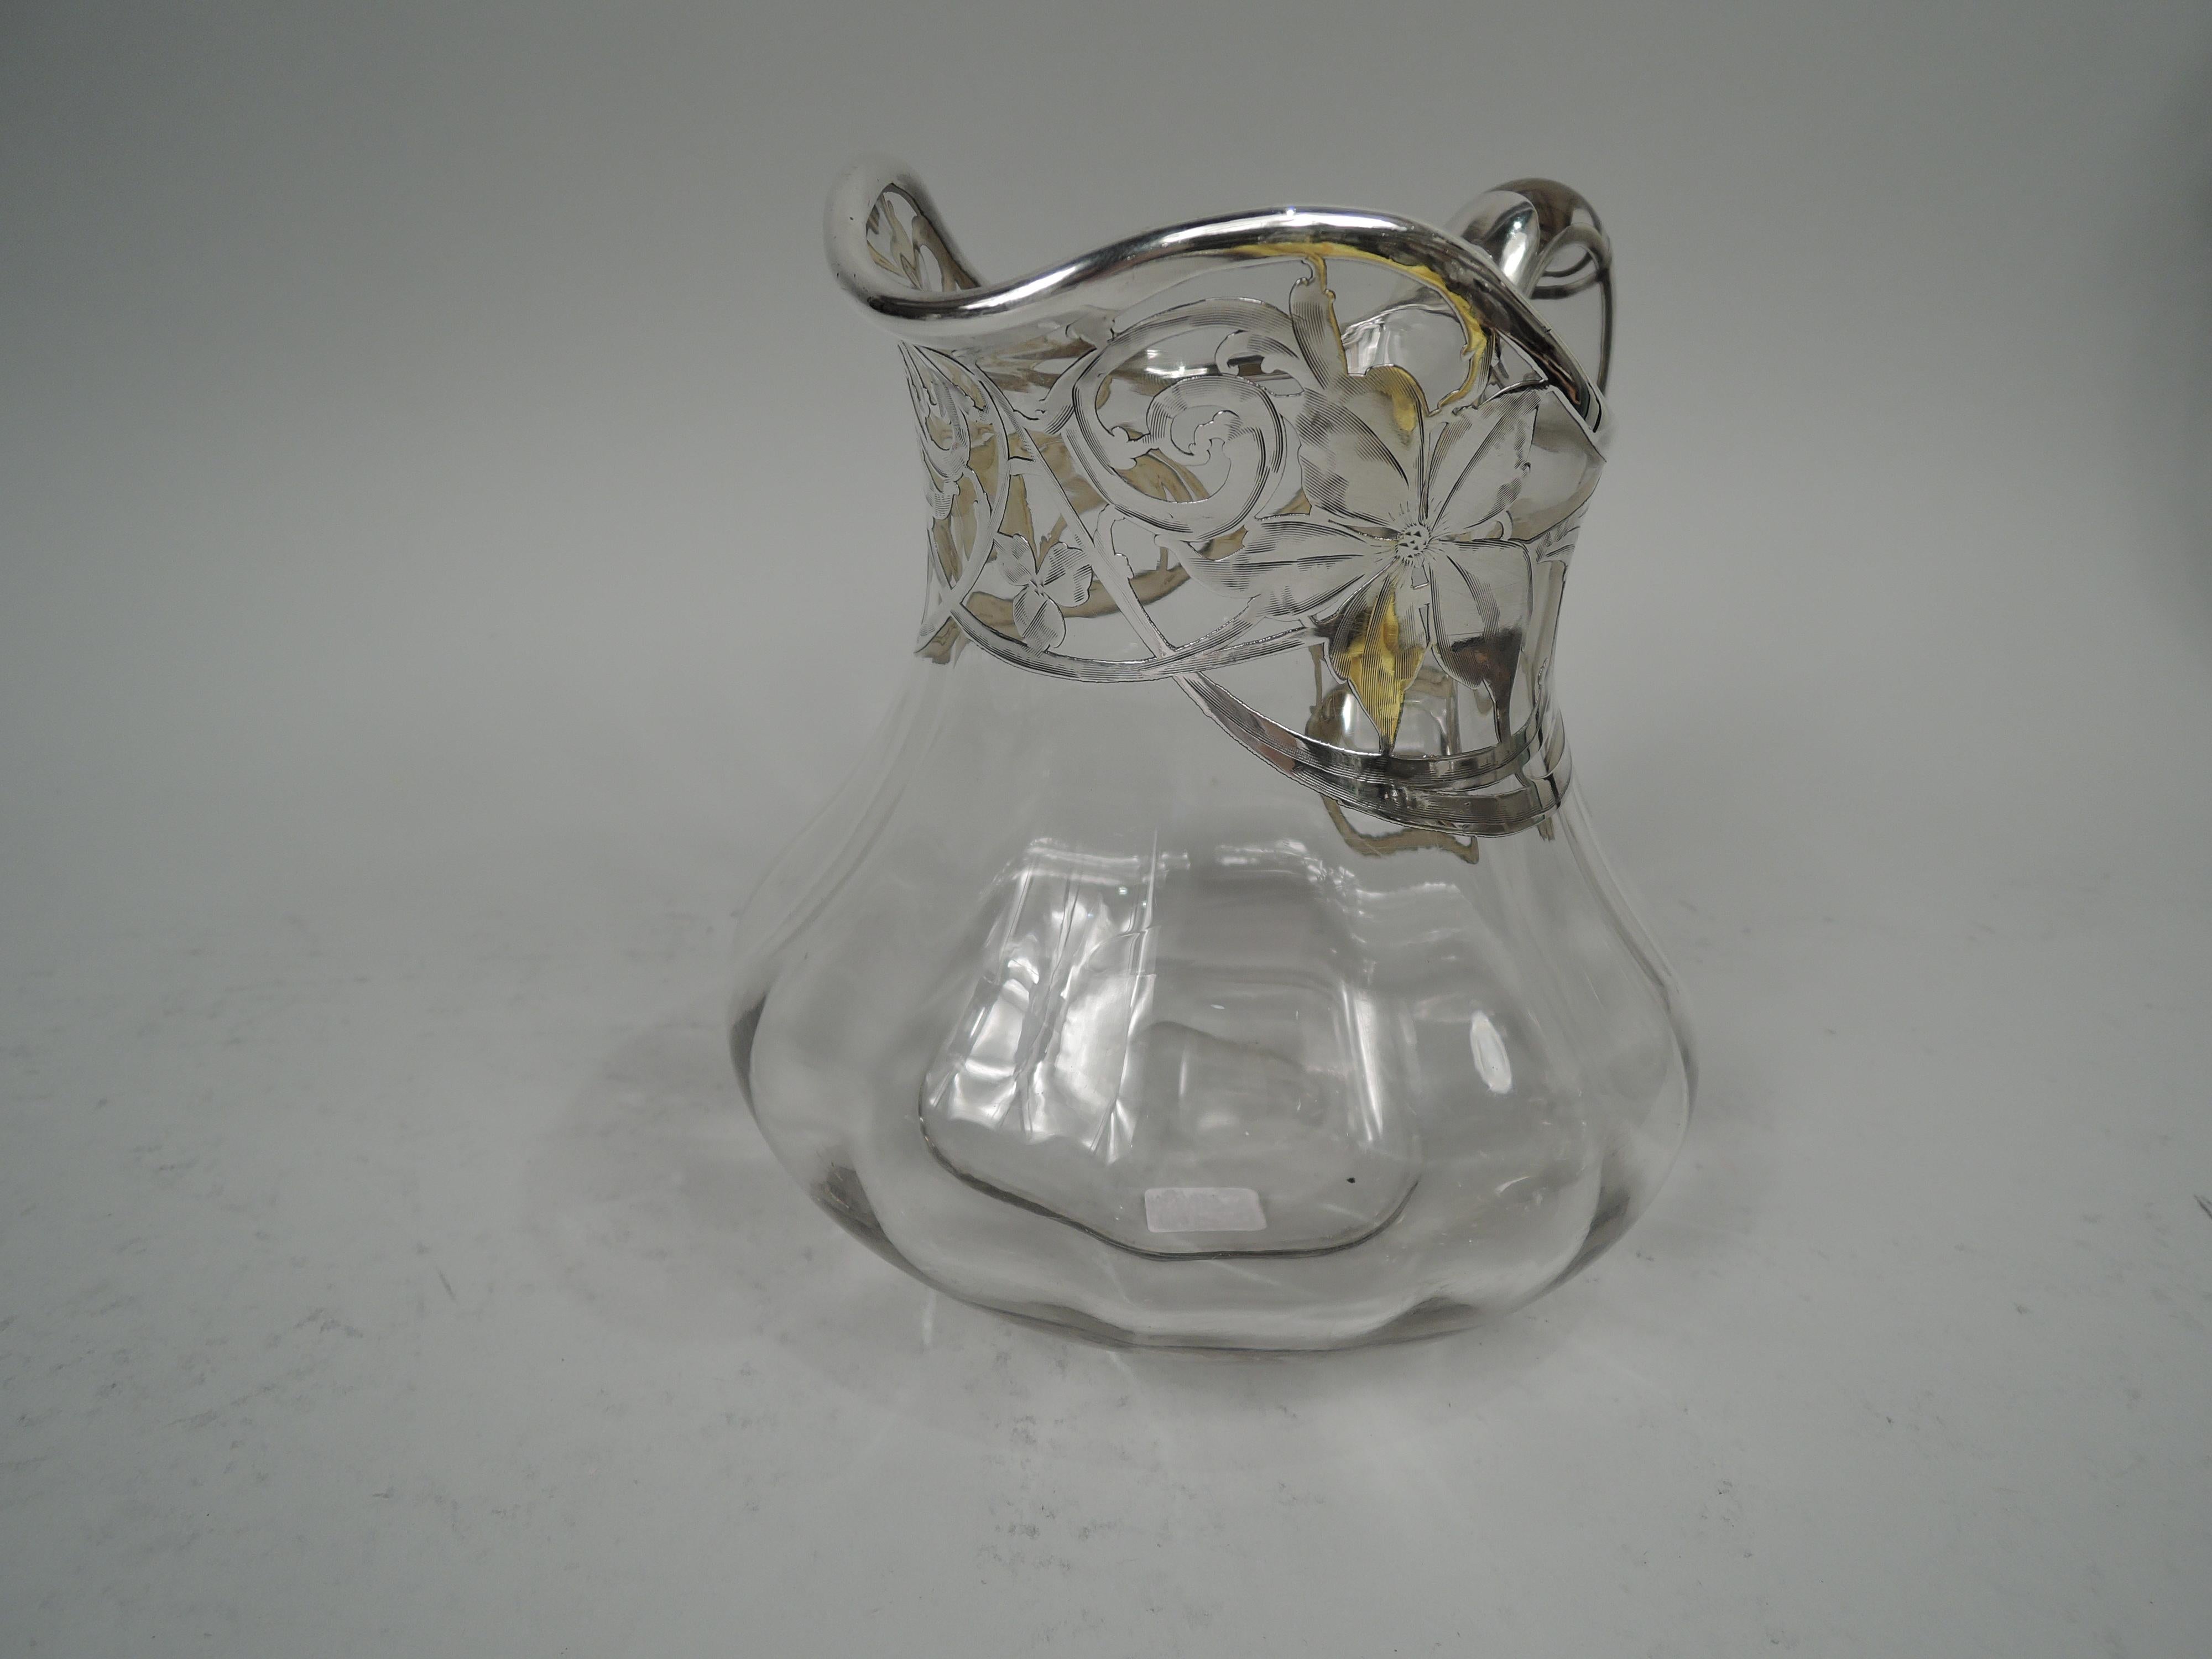 American Art Nouveau glass water pitcher with engraved silver overlay. Low with helmet mouth and spread bottom. Interior lobing and high-looping handles with silver bands. At top overlay in form of leafing scrollwork and flower heads. Glass is